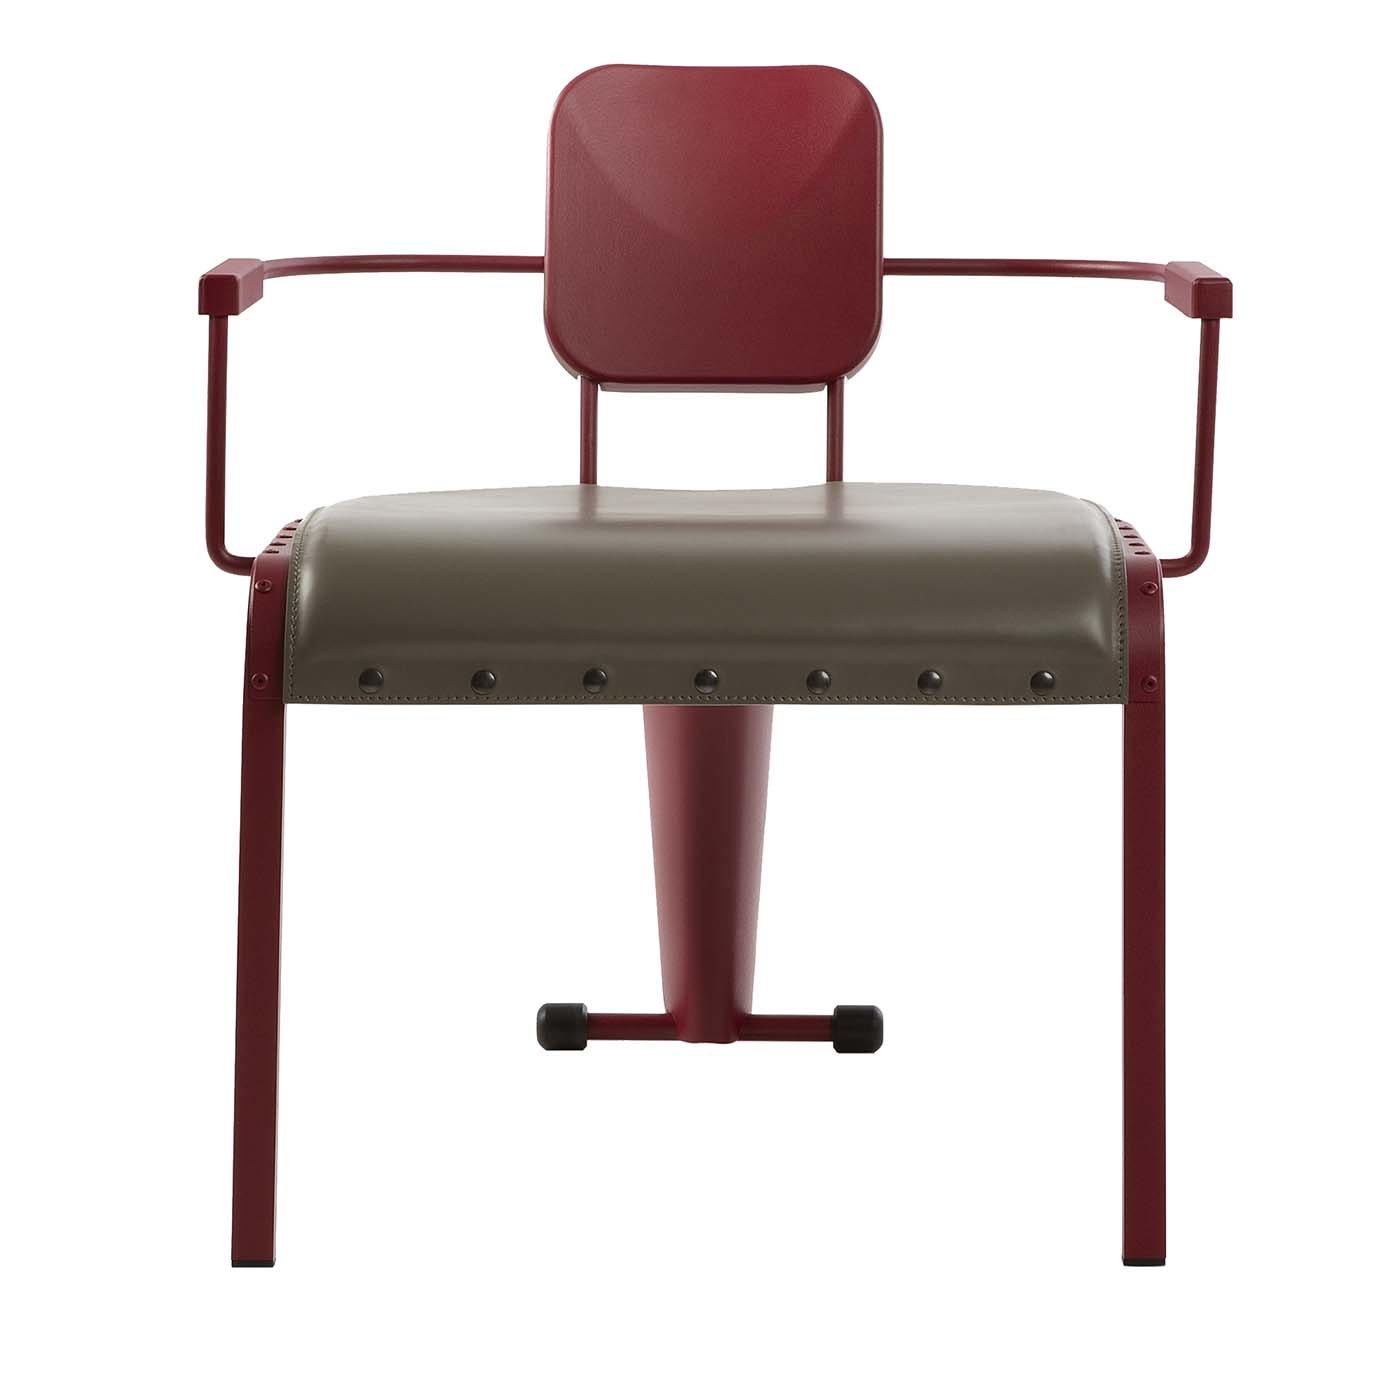 Rock Red Lounge Chair with Gray Leather Seat by Marc Sadler - Main view